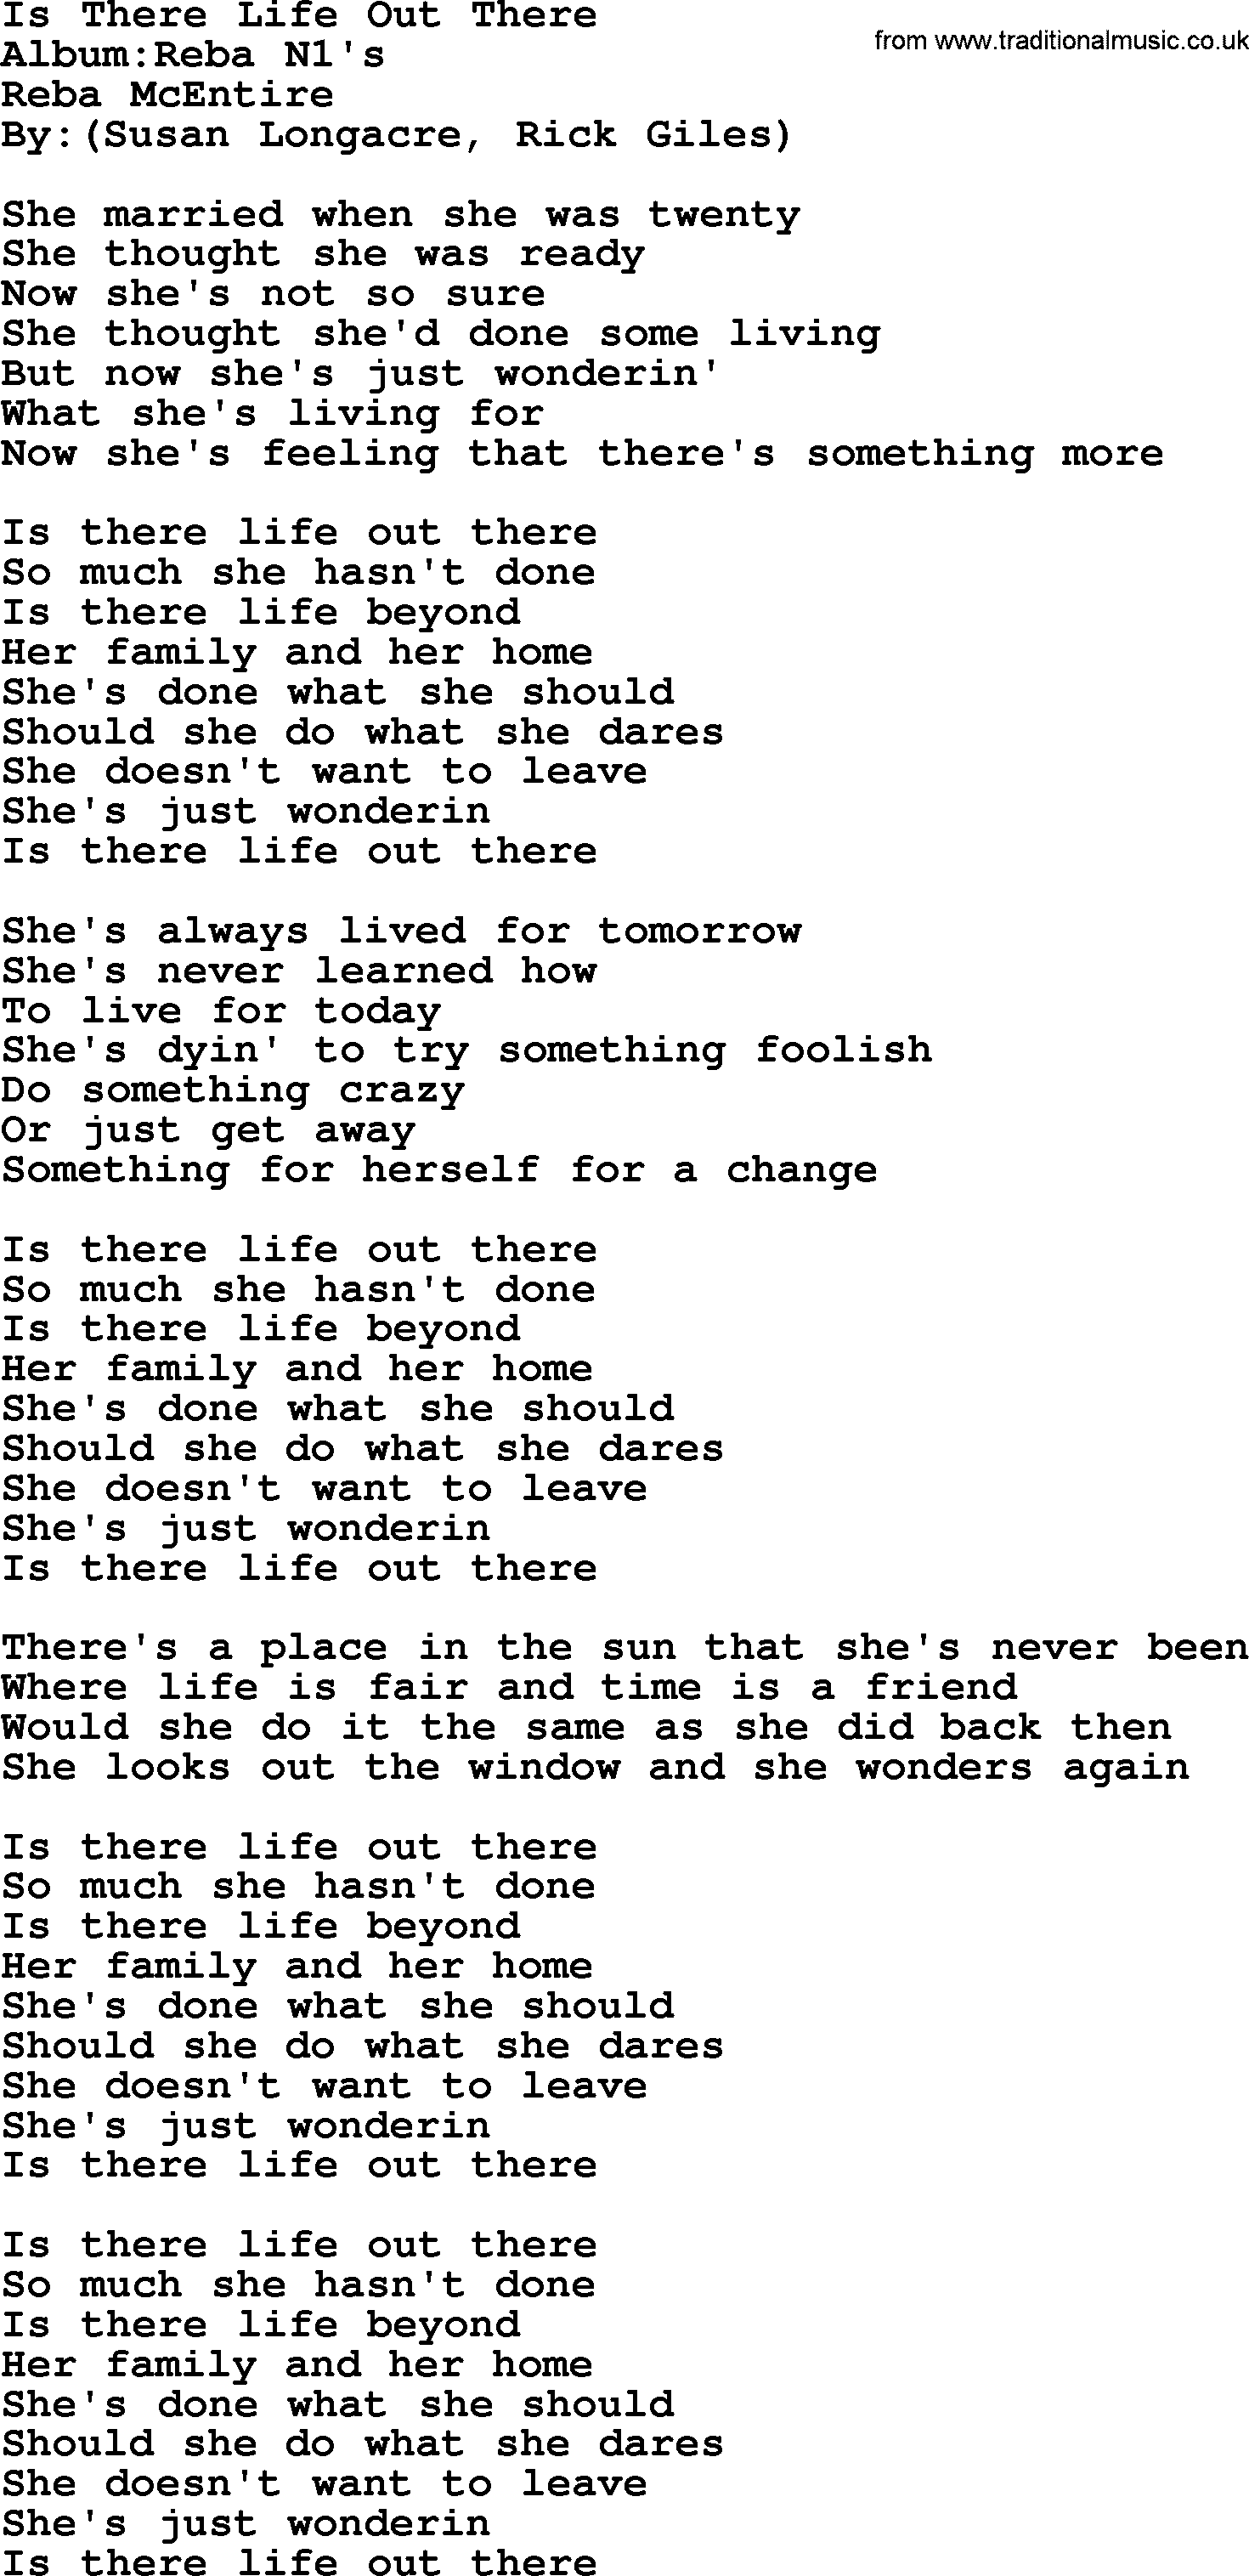 Reba McEntire song: Is There Life Out There lyrics